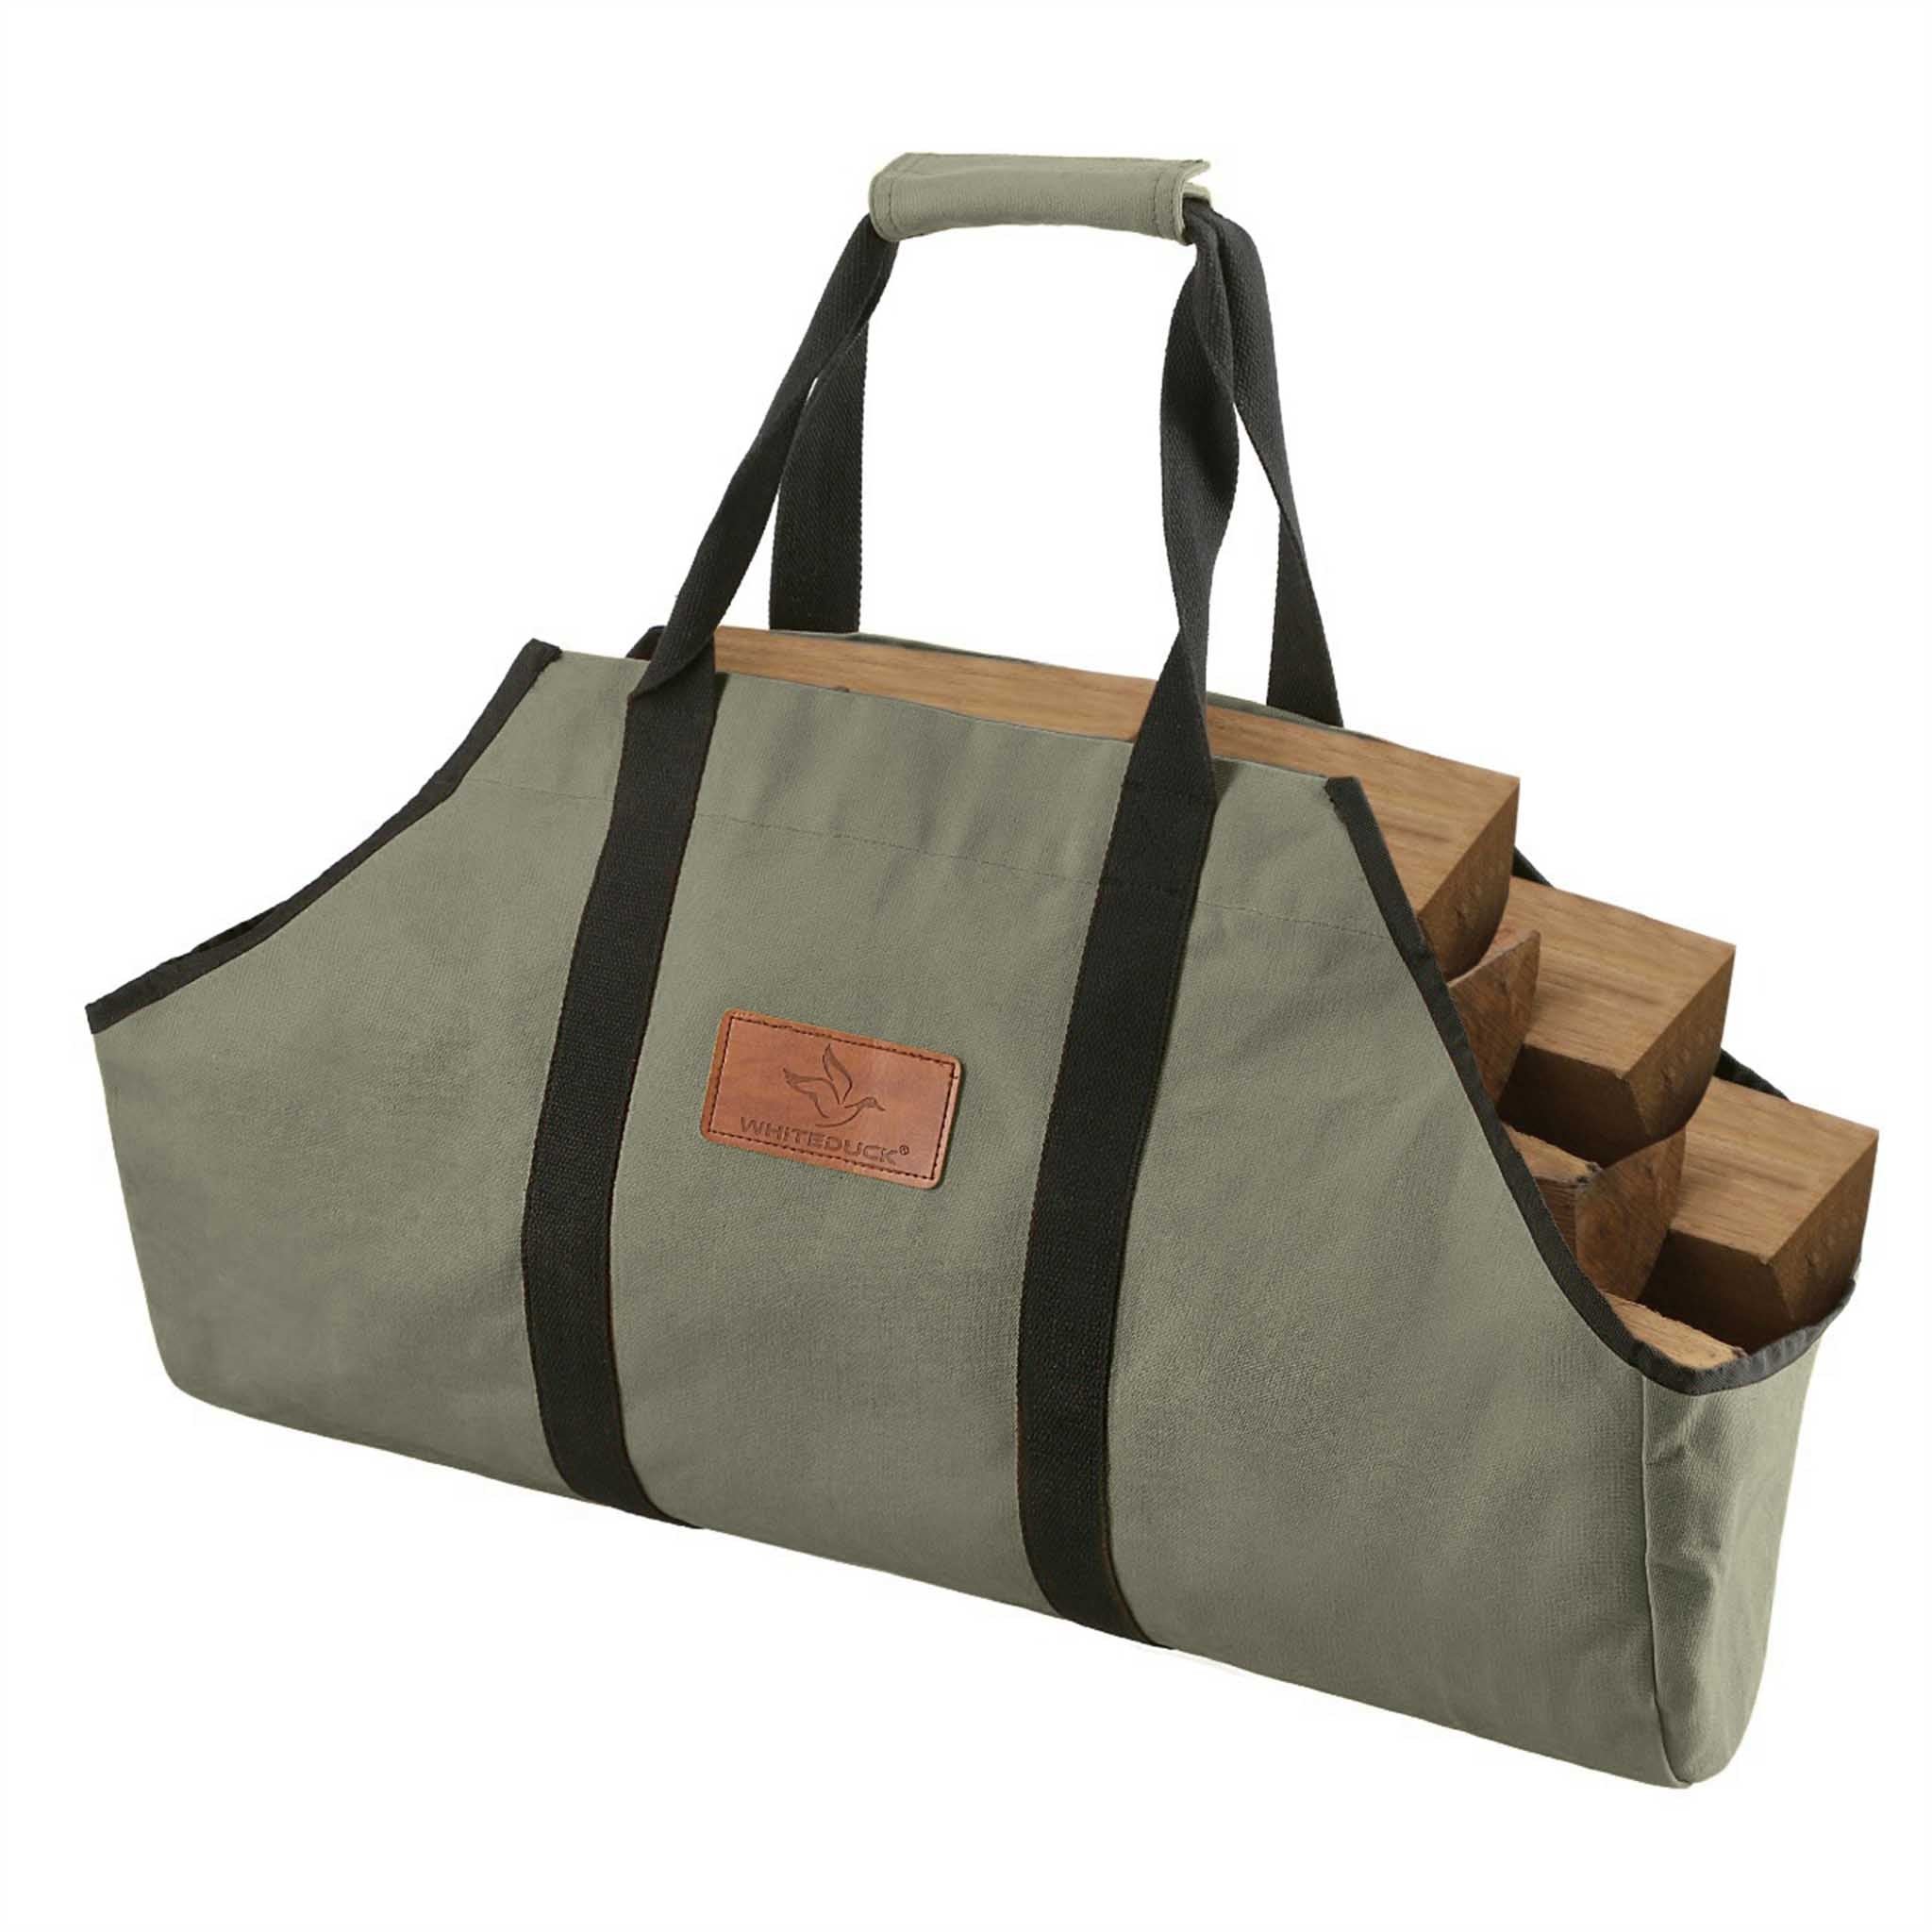 Arlmont & Co. Firewood Carrier Bag, Waxed Canvas Log Carrier Bag